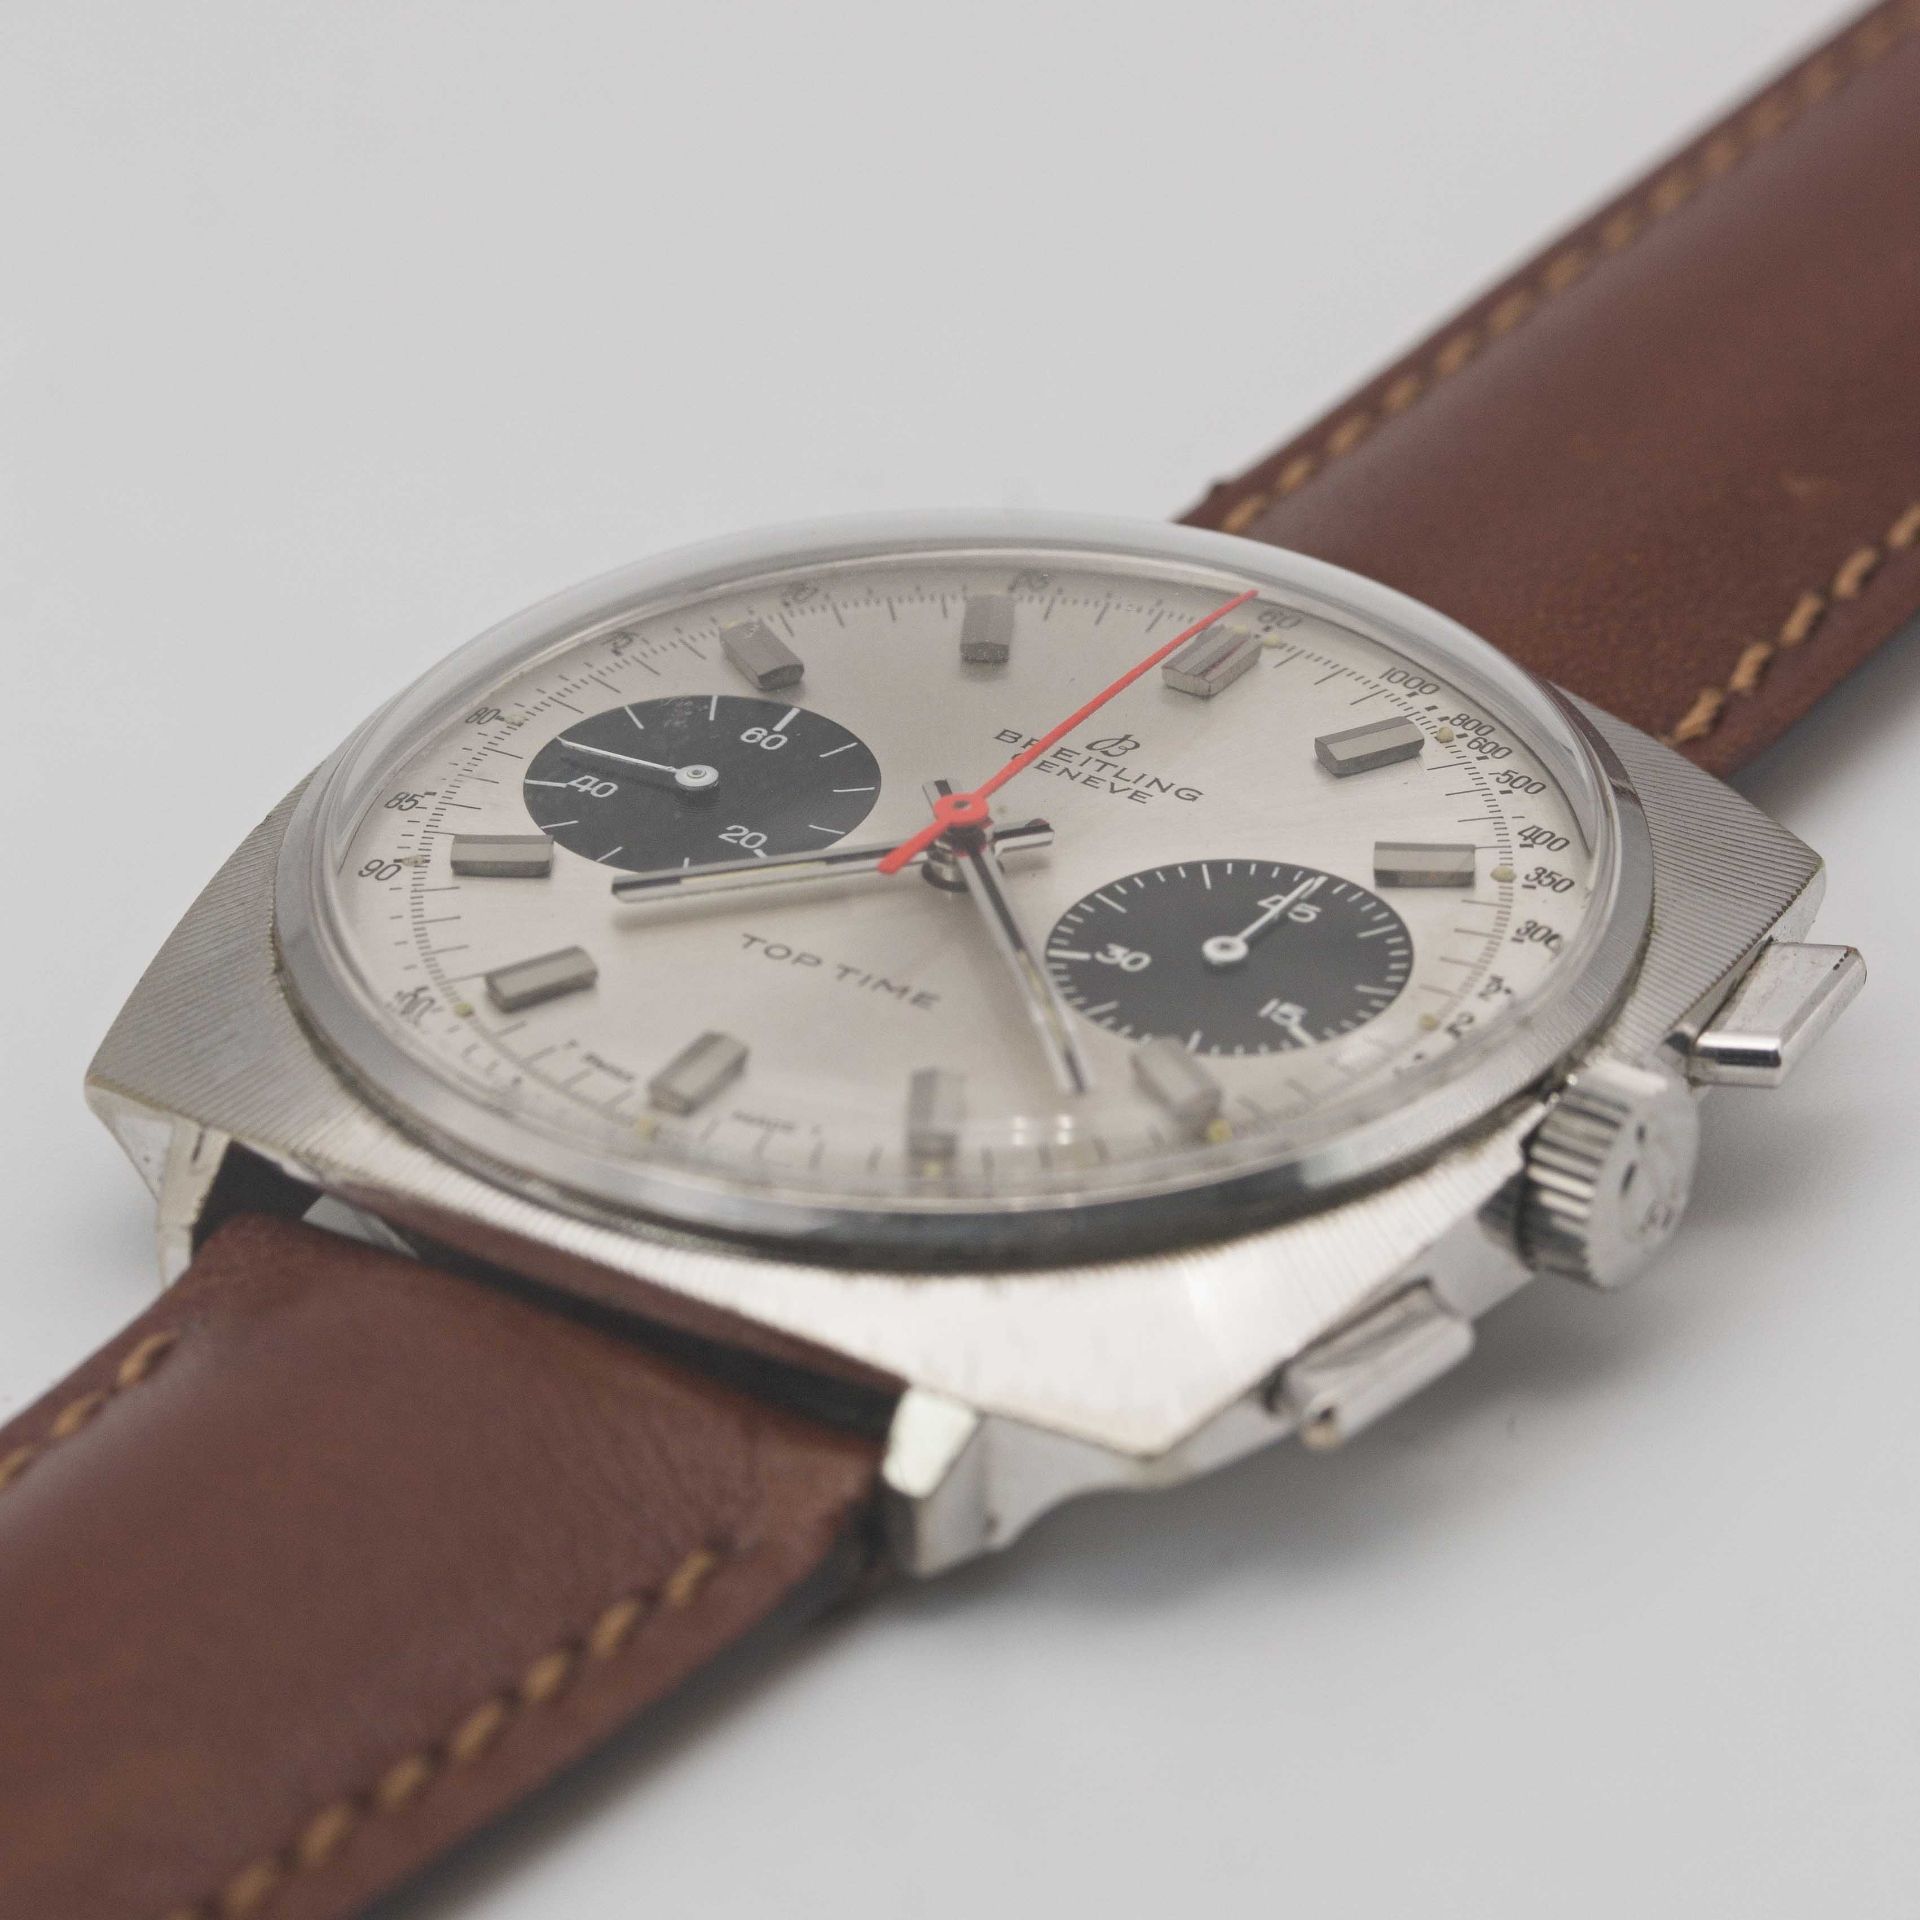 A GENTLEMAN'S BREITLING TOP TIME CHRONOGRAPH WRIST WATCH CIRCA 1969, REF. 2006/33 WITH "PANDA" - Image 3 of 9